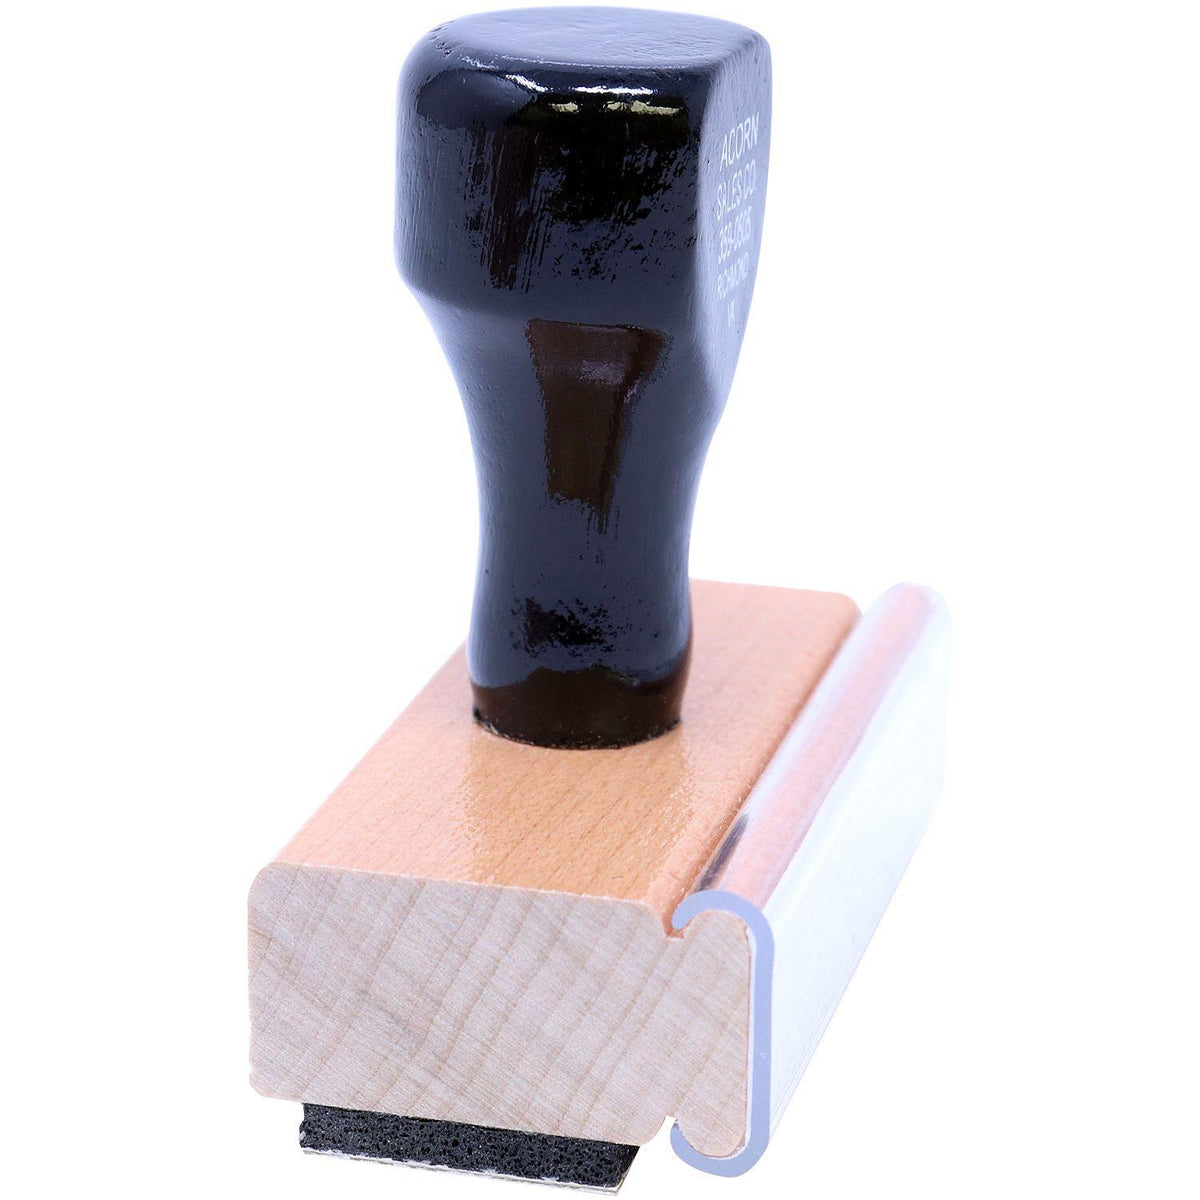 Side View of Large Rejected Rubber Stamp at an Angle